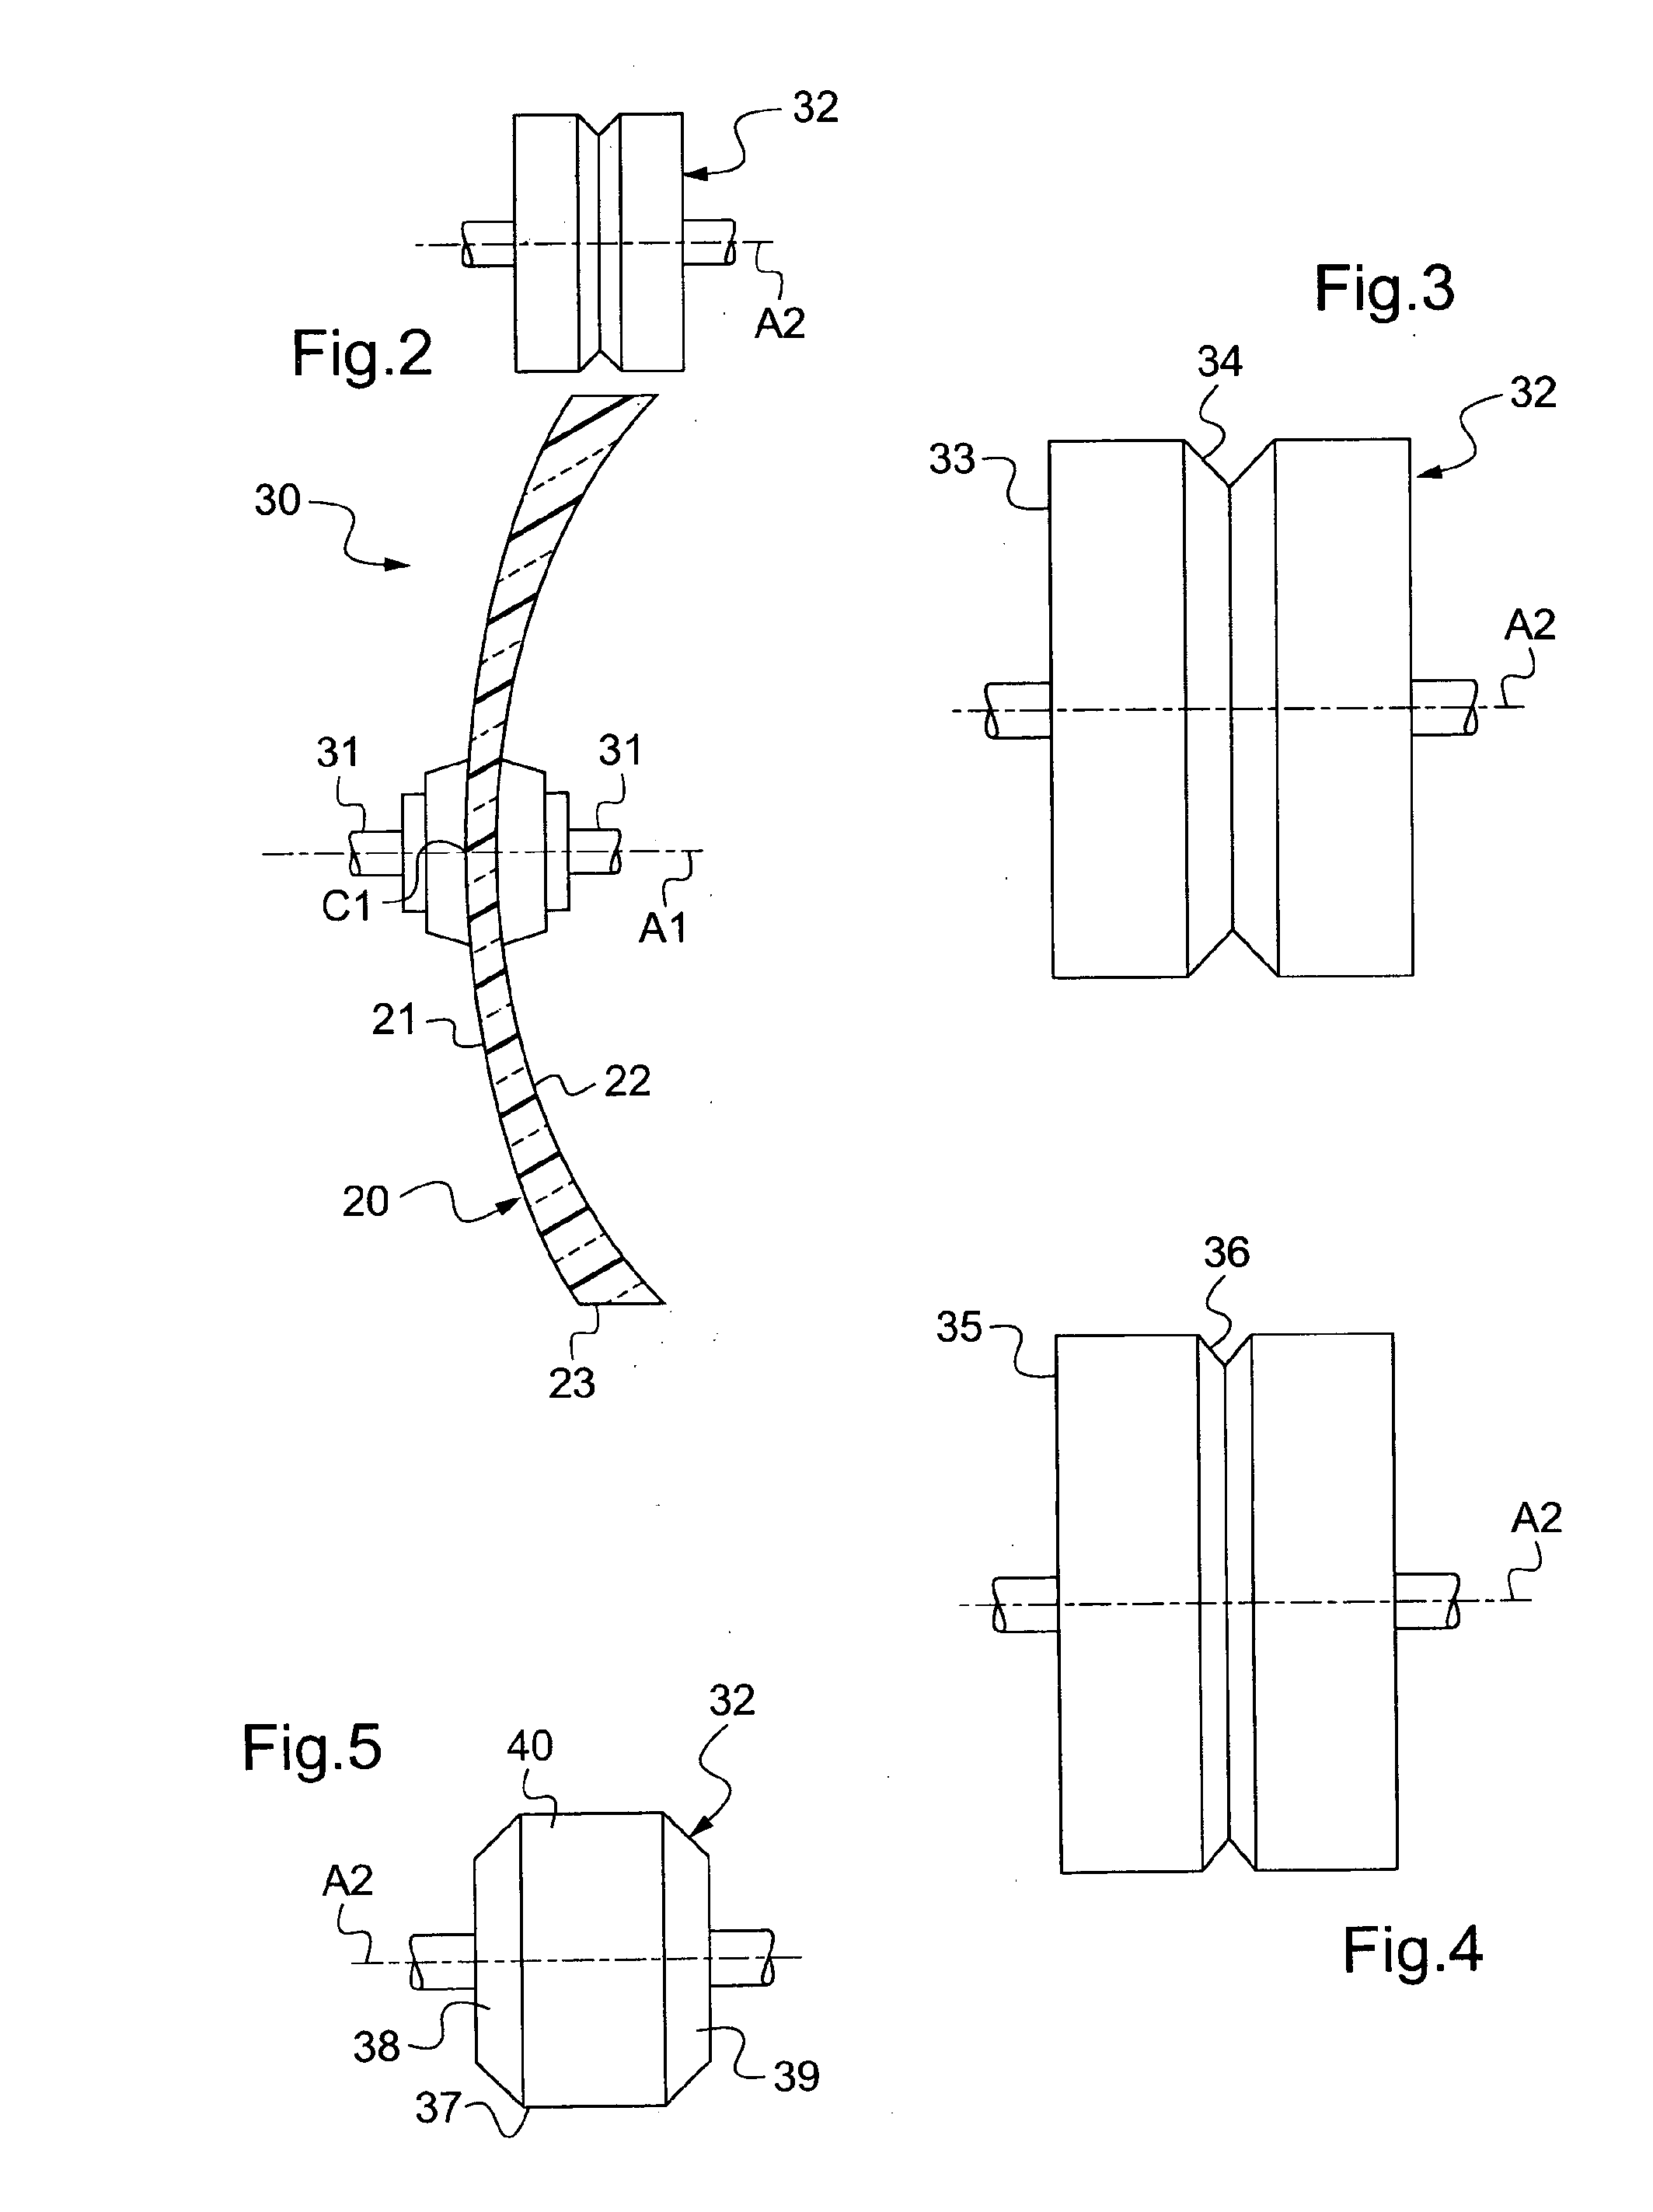 Method of preparing an ophthalmic lens with special machining of its engagement ridge